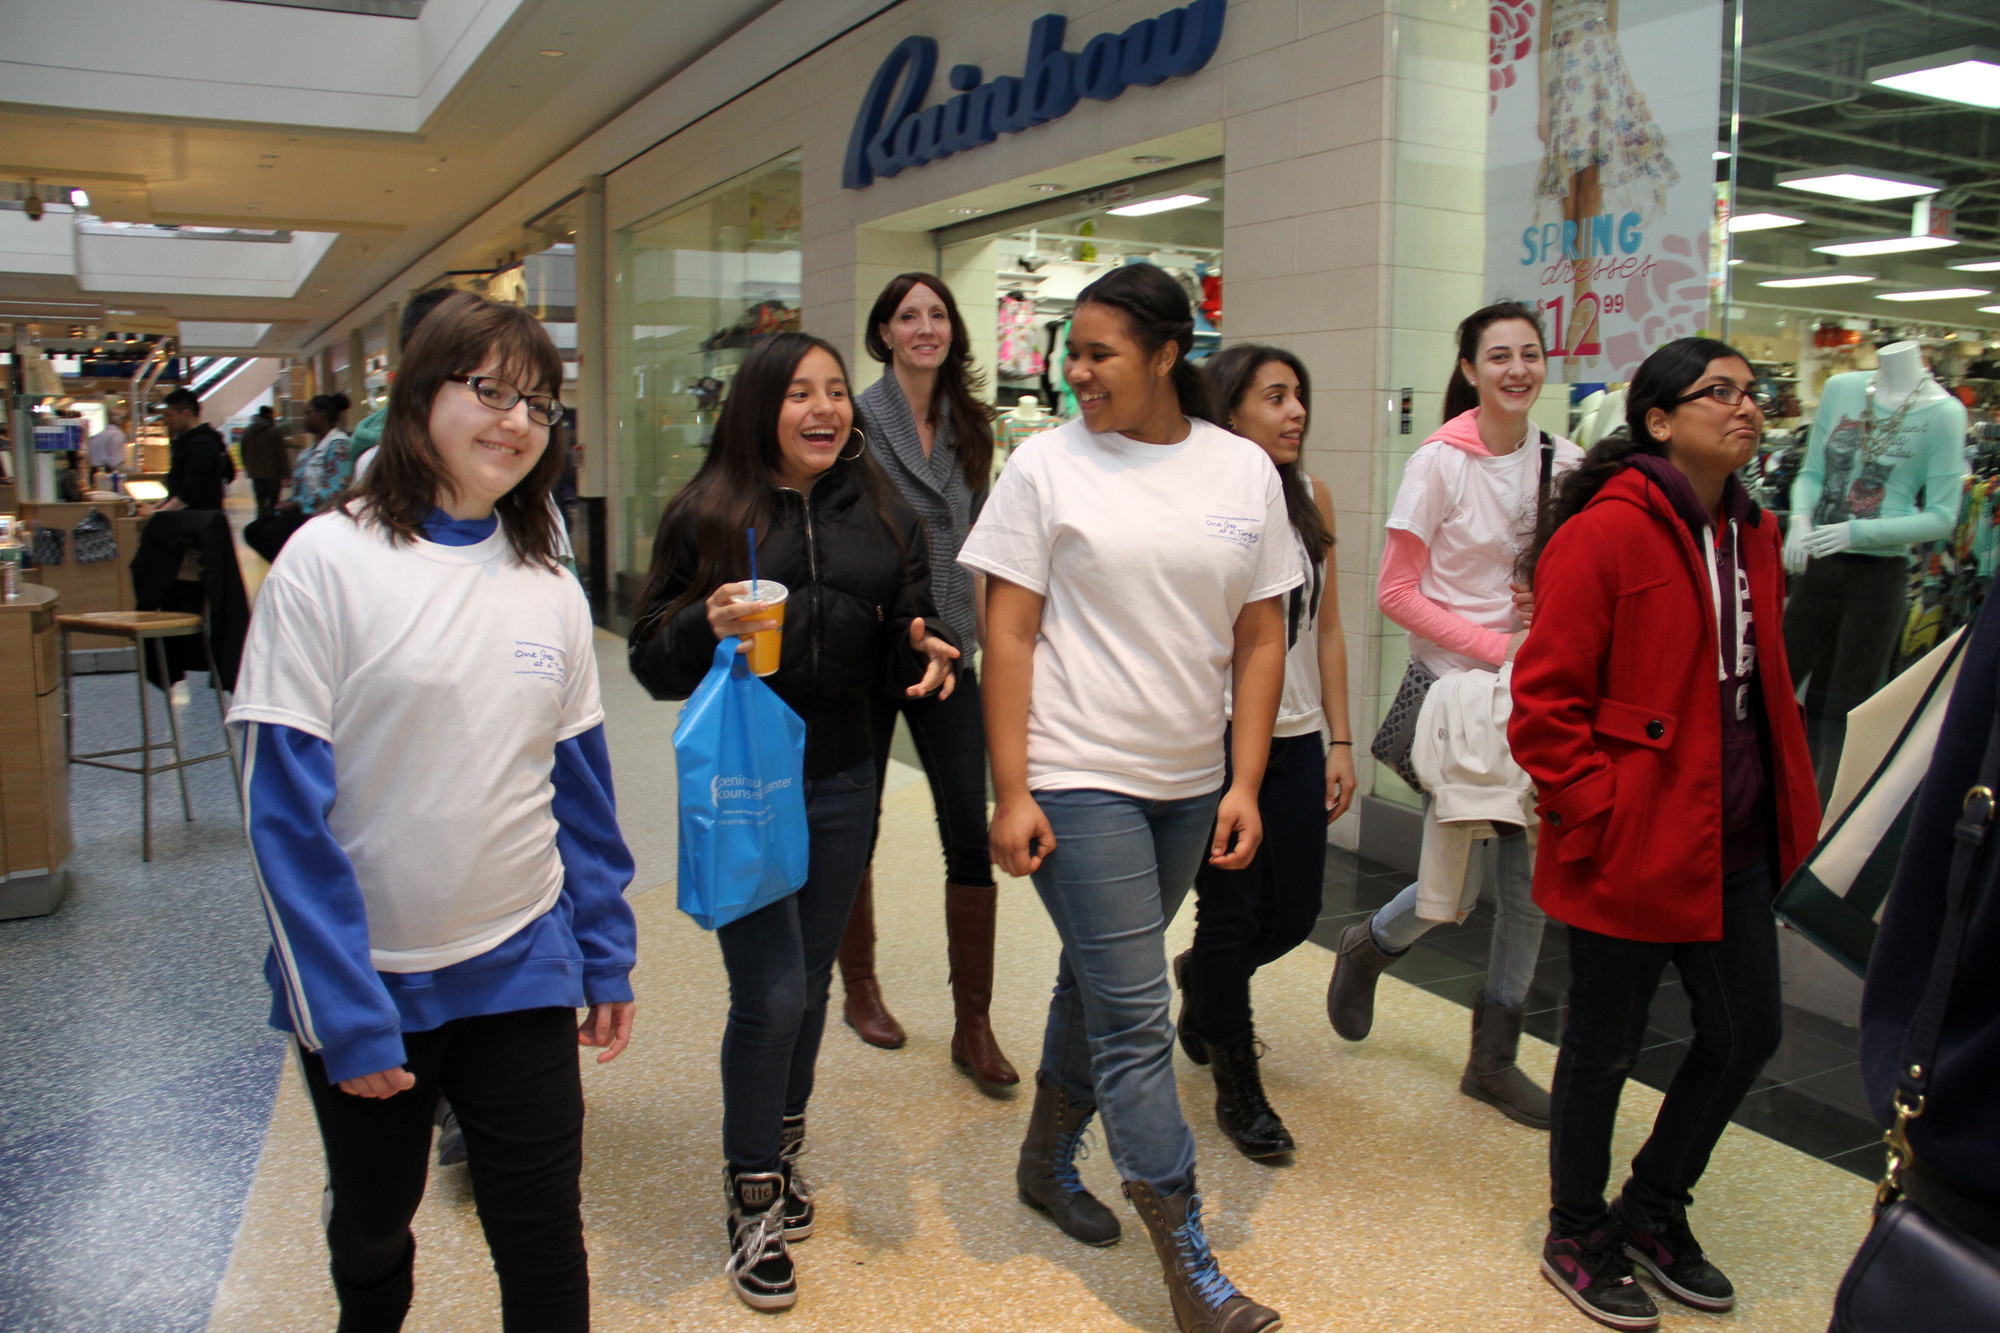 Students and teachers from Valley Stream schools walked through the Green Acres Mall last Sunday to support the Peninsula Counseling Center.